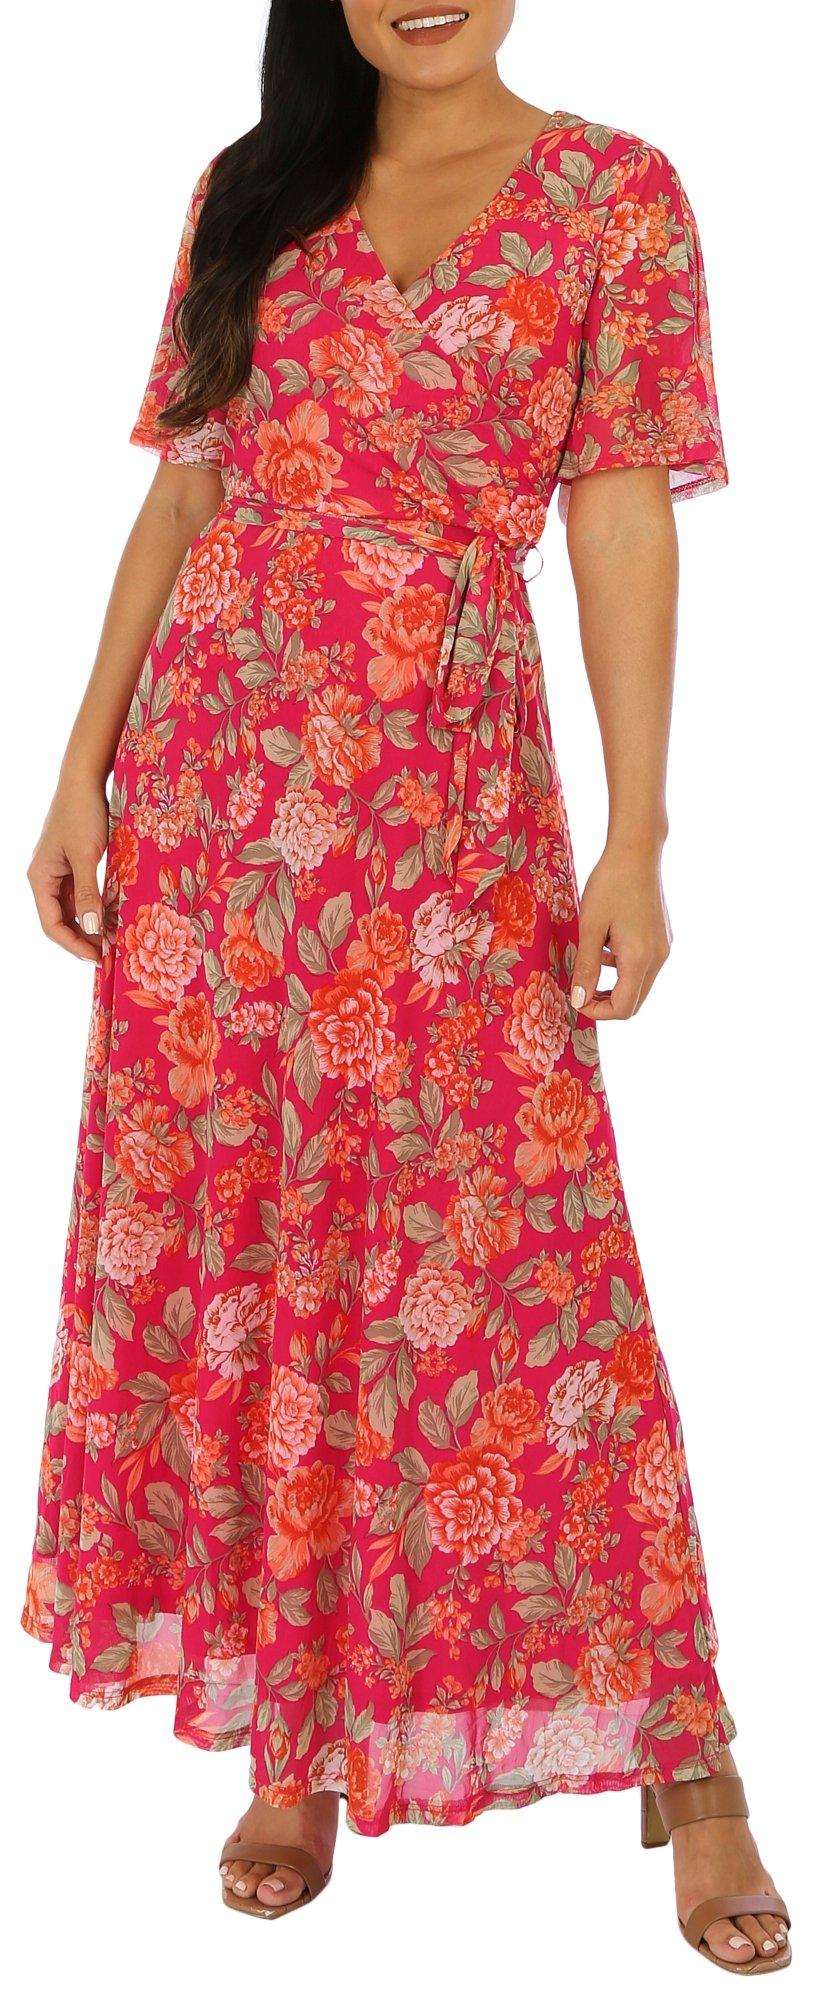 Harlow and Rose Womens Floral Mesh Short Sleeve Maxi Dress